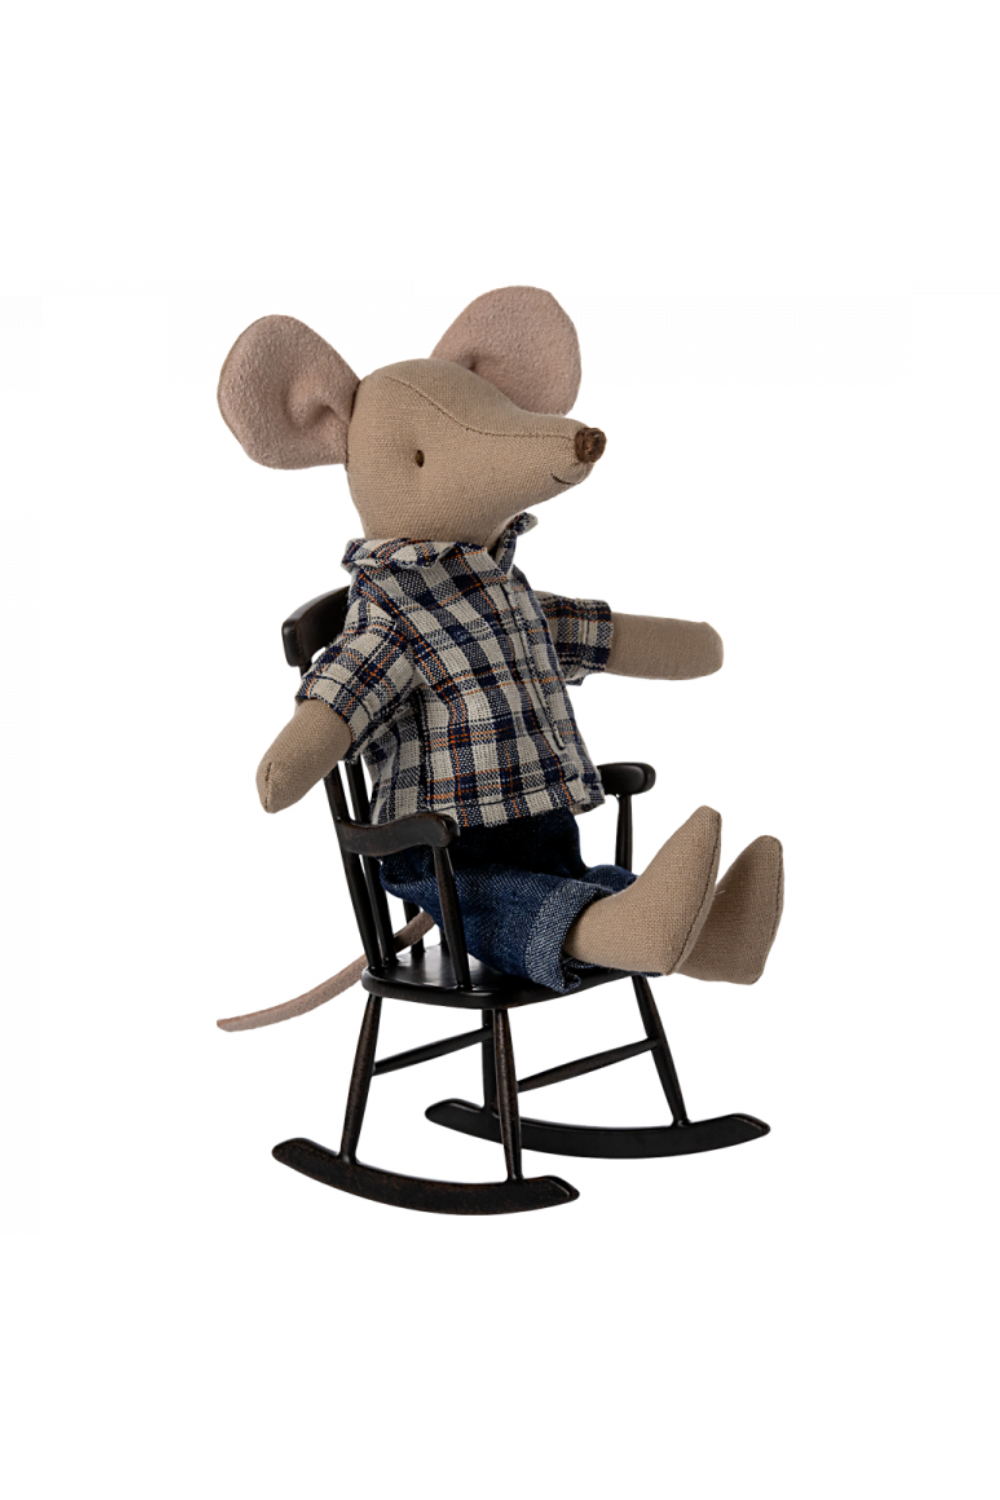 Maileg Mouse Size Rocking Chair - Anthracite: Dollhouse Decor